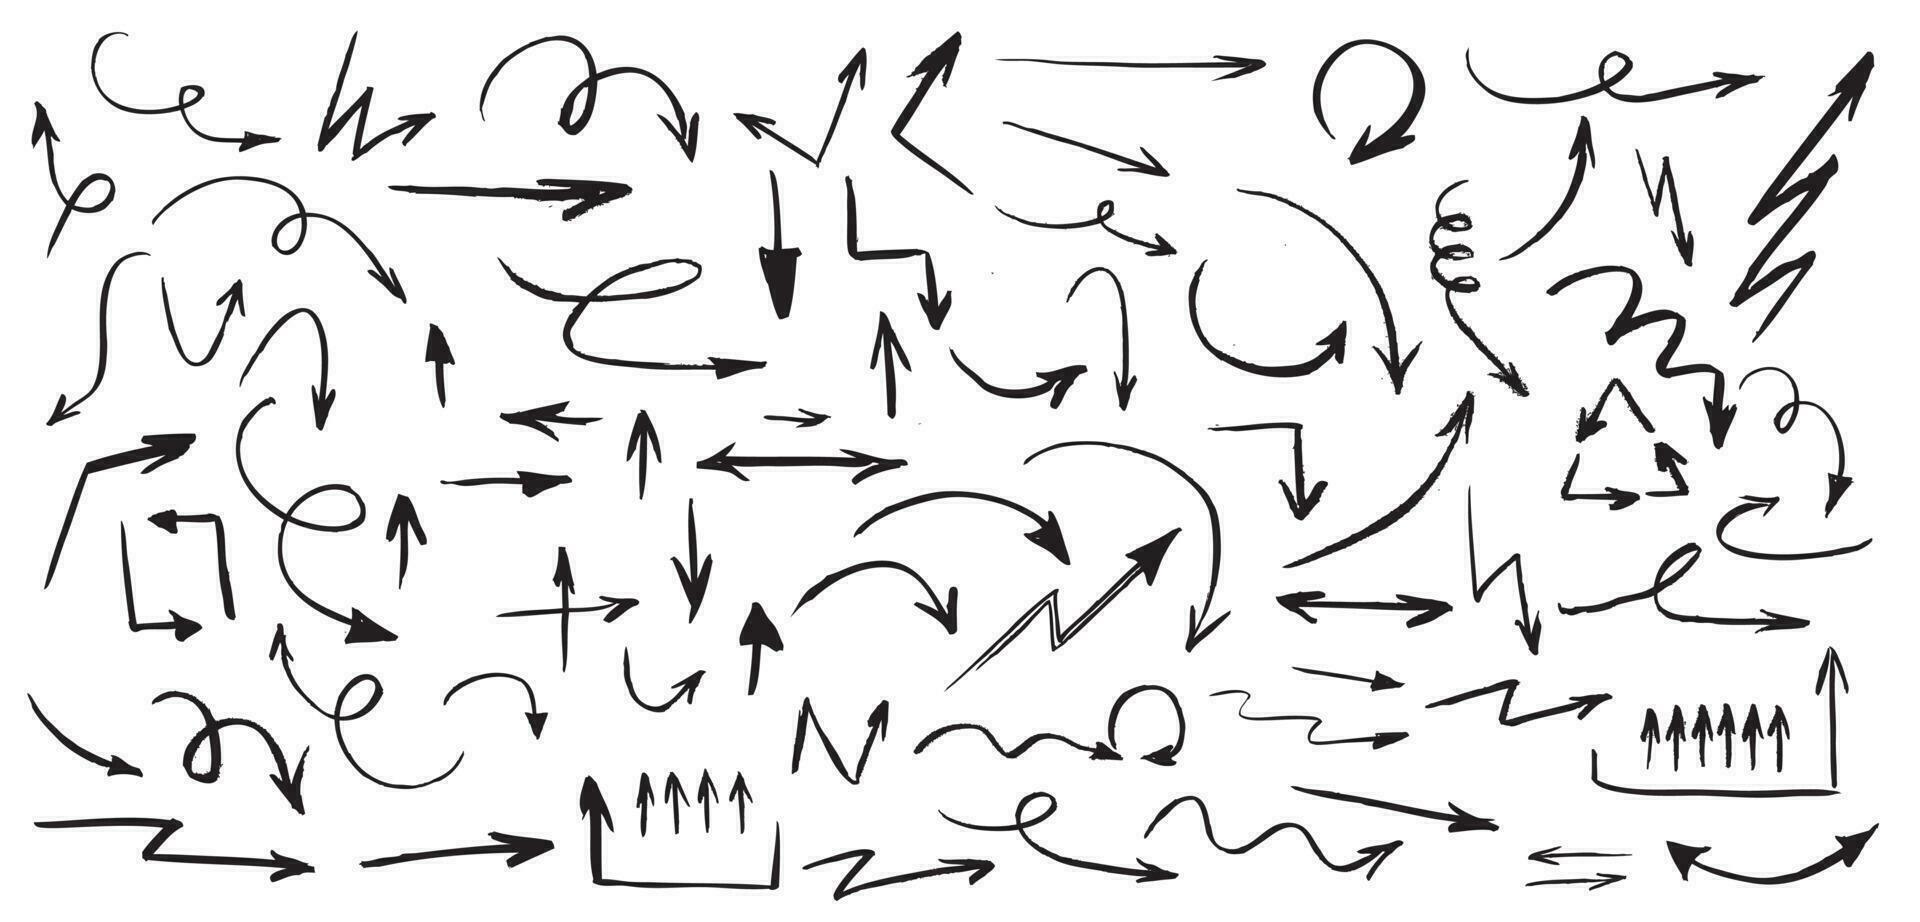 Arrows in hand drawn style. Doodle illustration. vector